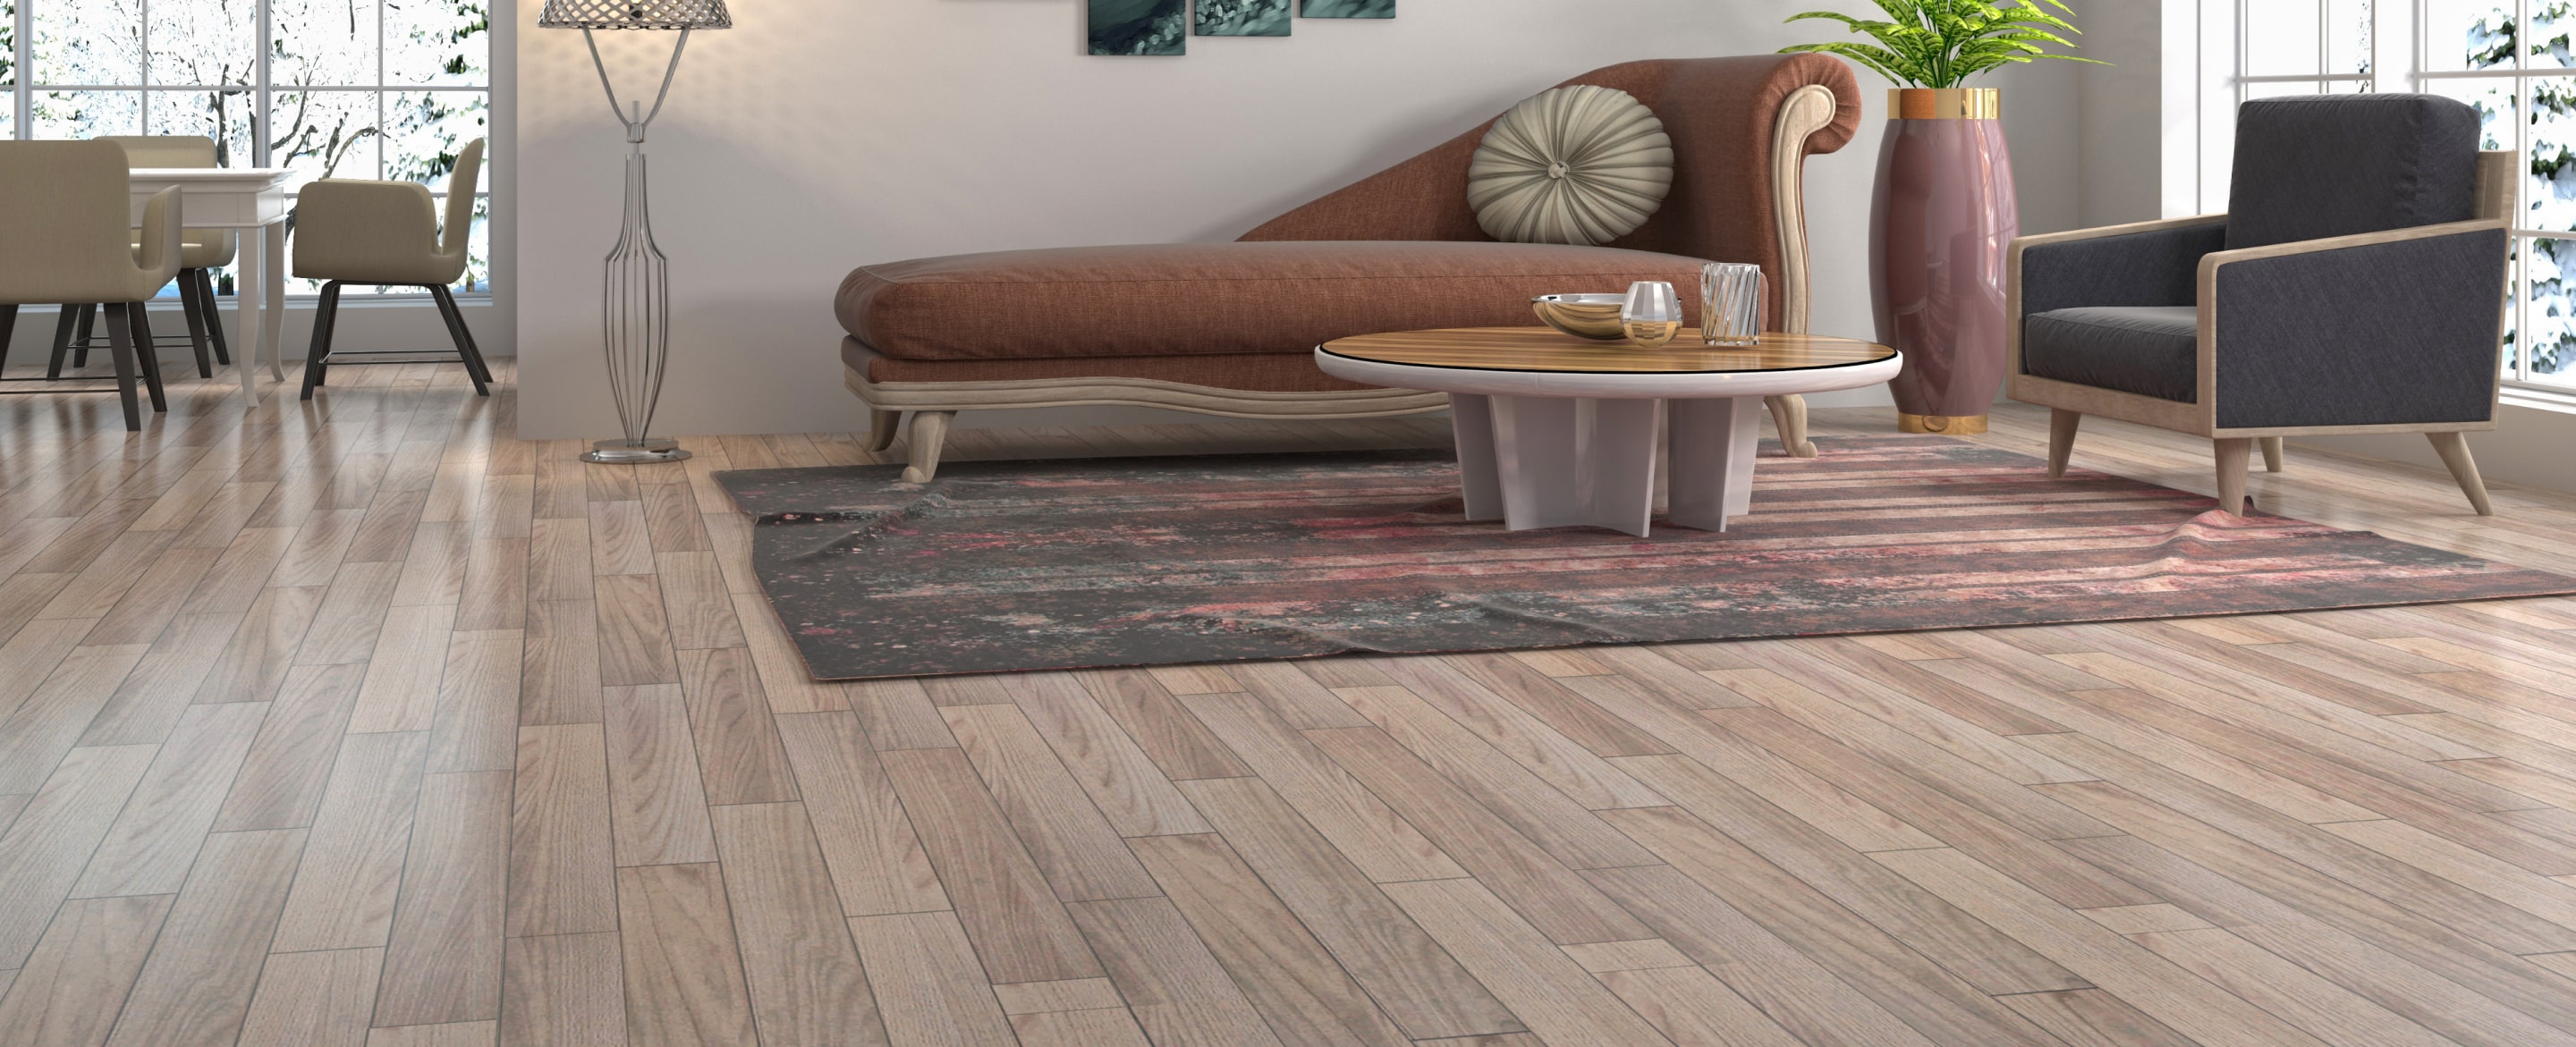 wood look flooring in a stylish living room